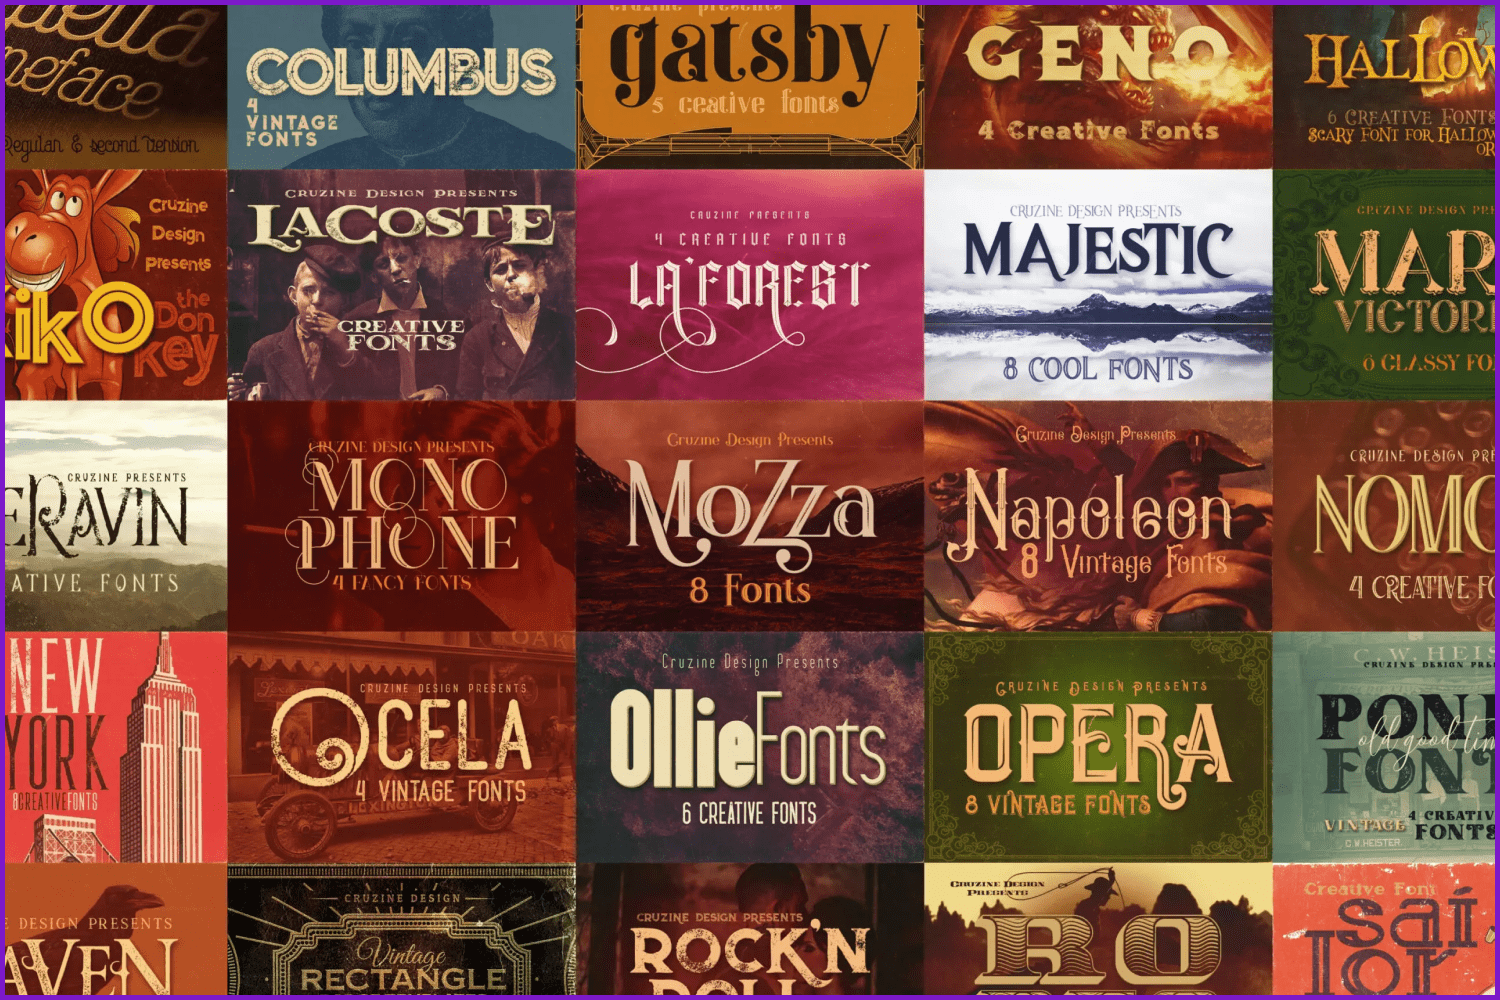 Variants of using the font on different flyers.